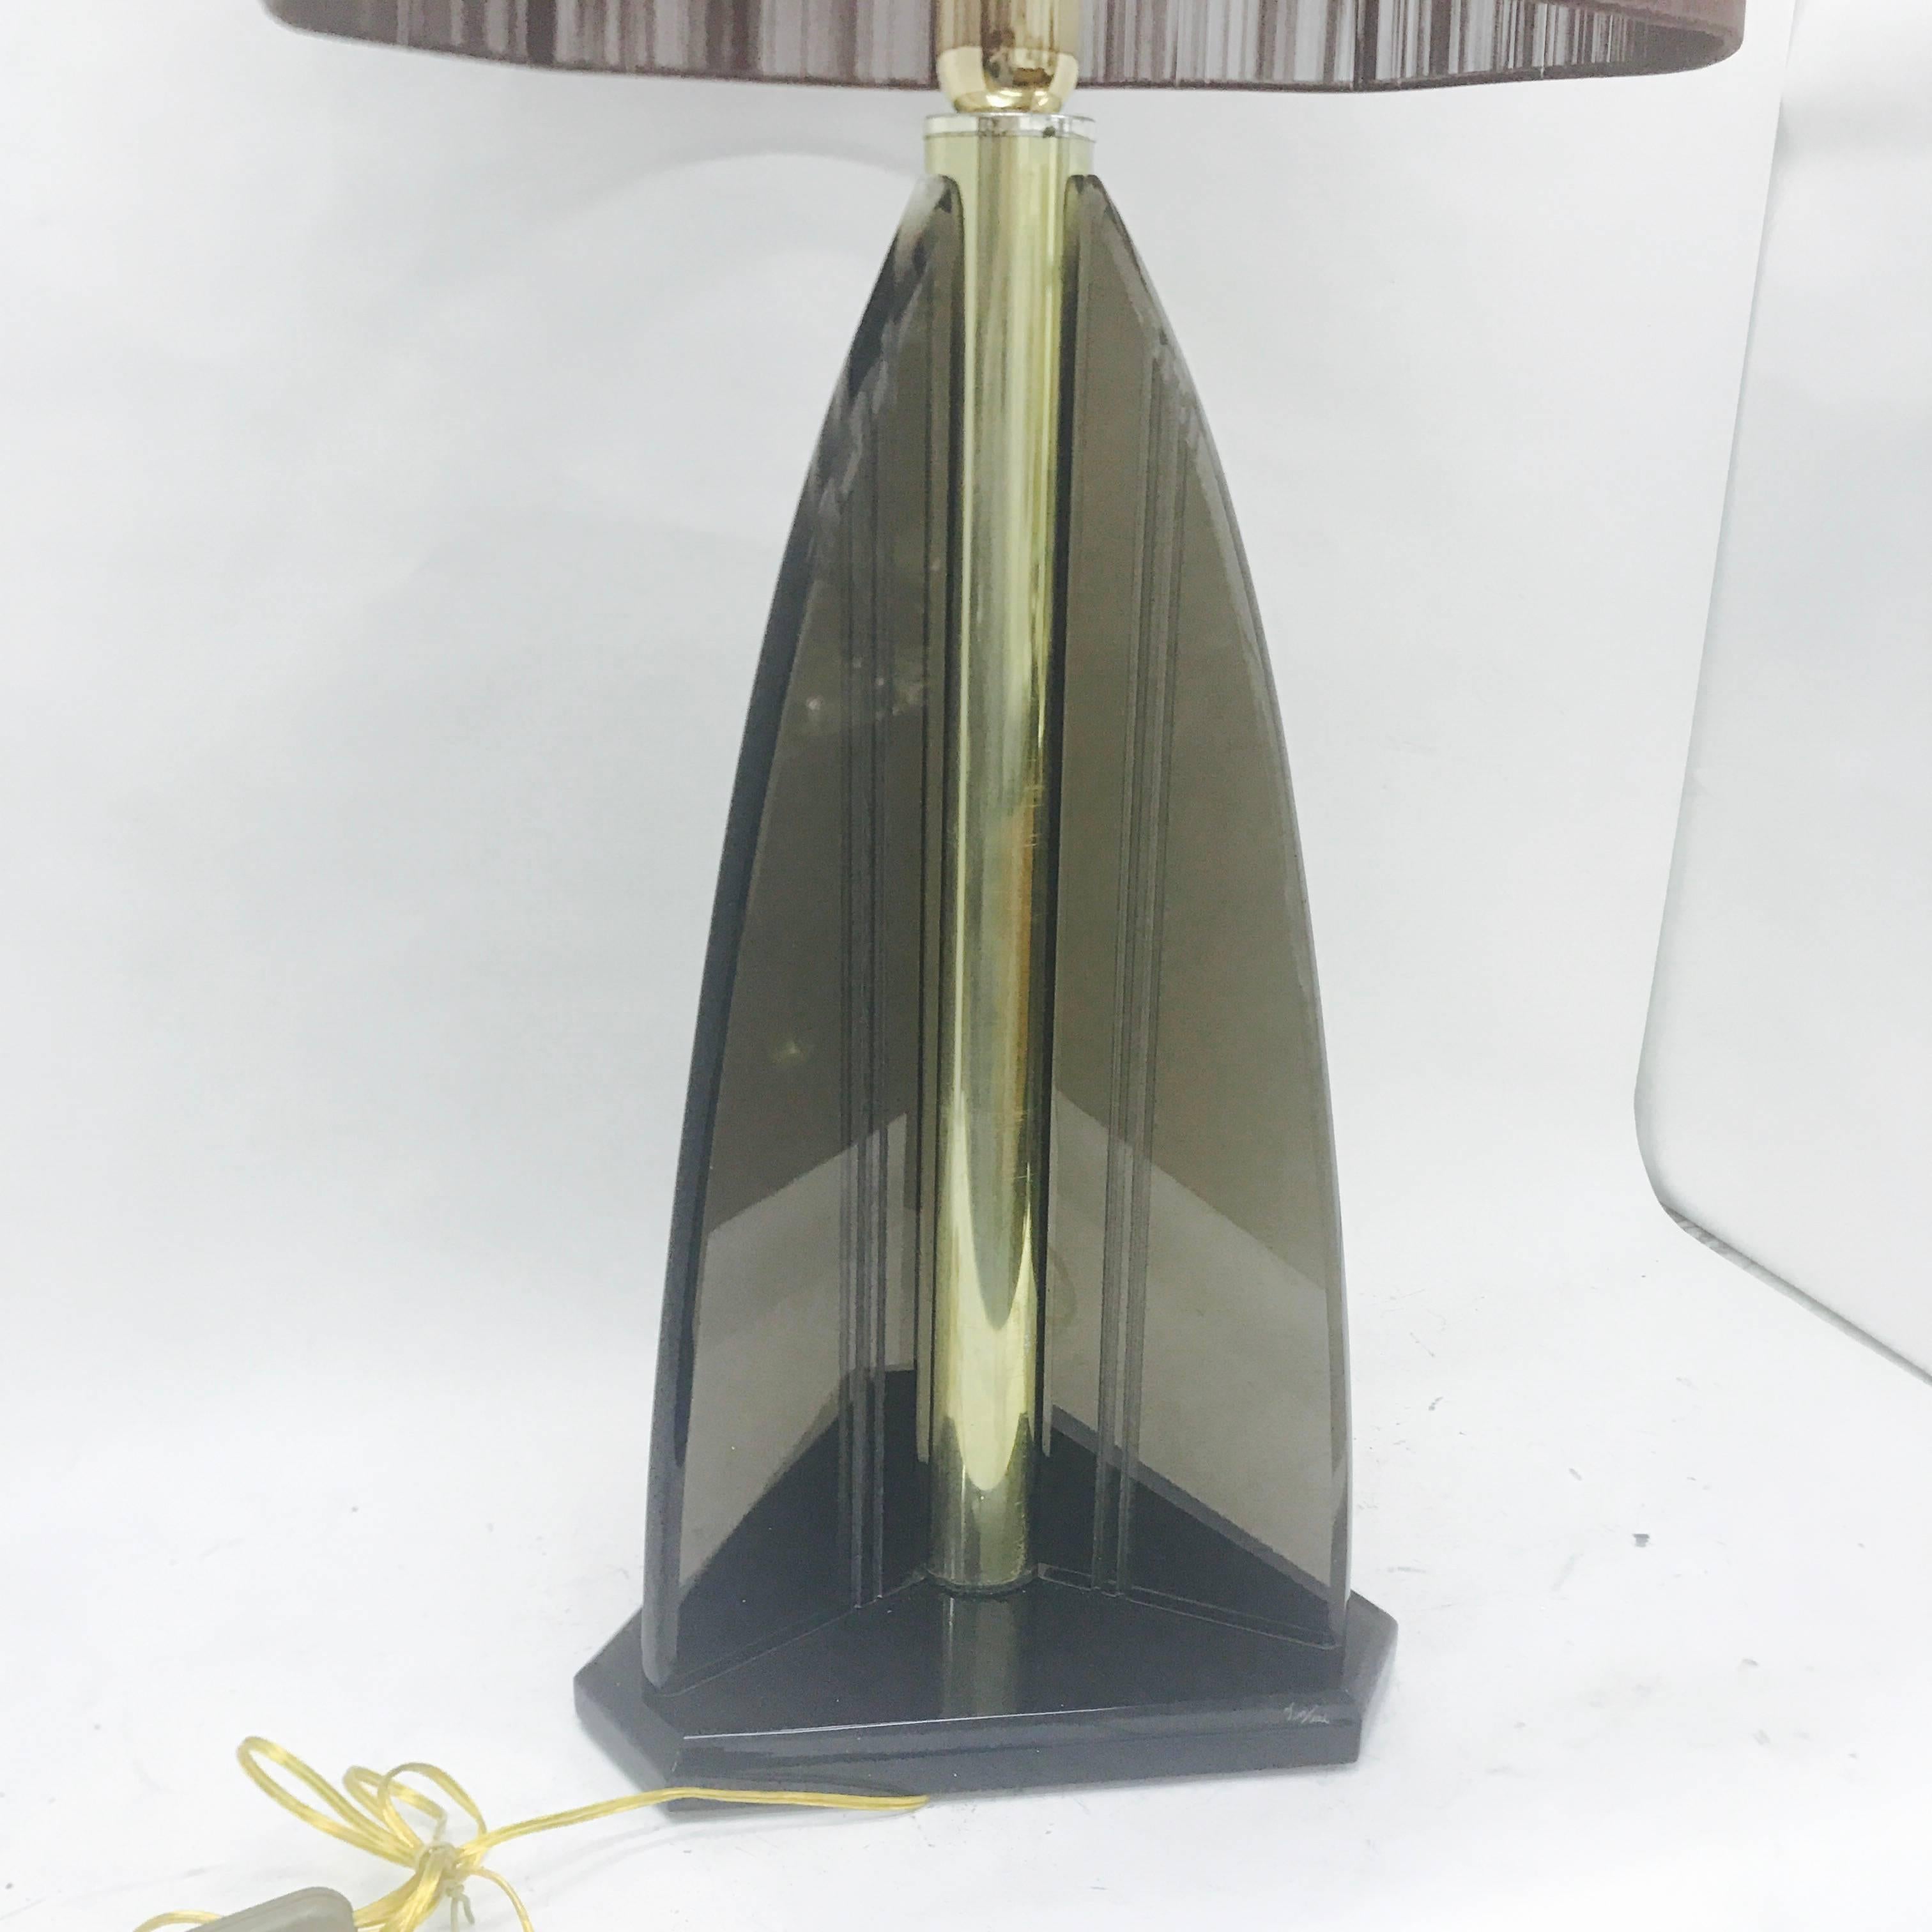 Particular brass and Lucite table lamp by Van Teal, probably made in 1980, electrical parts fully restored. The lampshade is not original and not included, for shipping cost reasons.
Without lampshade sizes, side cm 28 height cm 62.
It works with